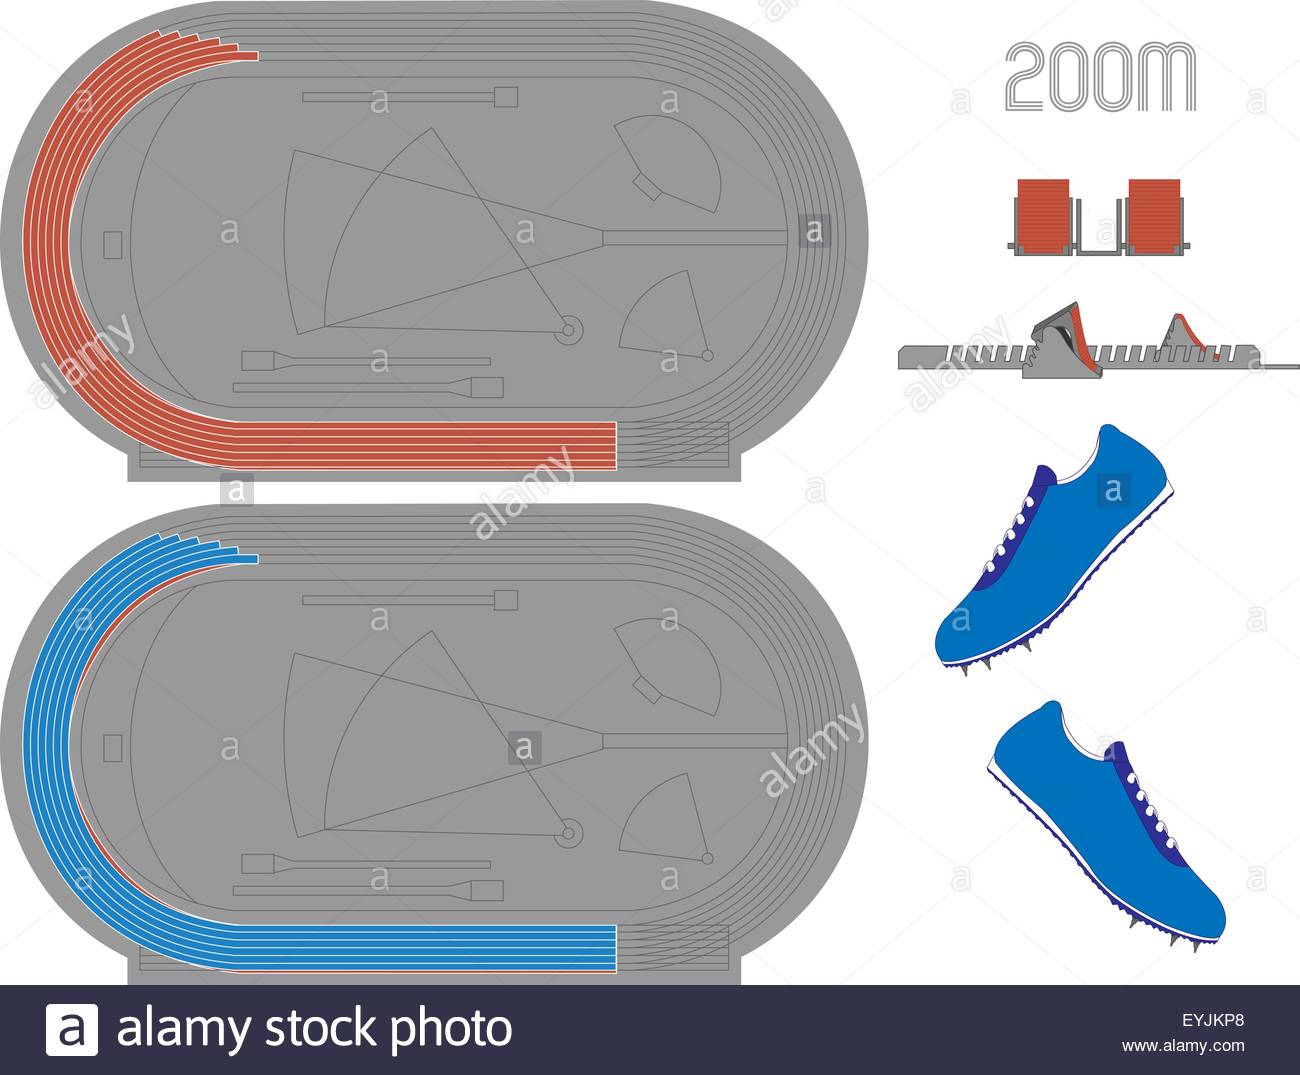 200 Meters Running Track in Red and Blue - Stock Vector.